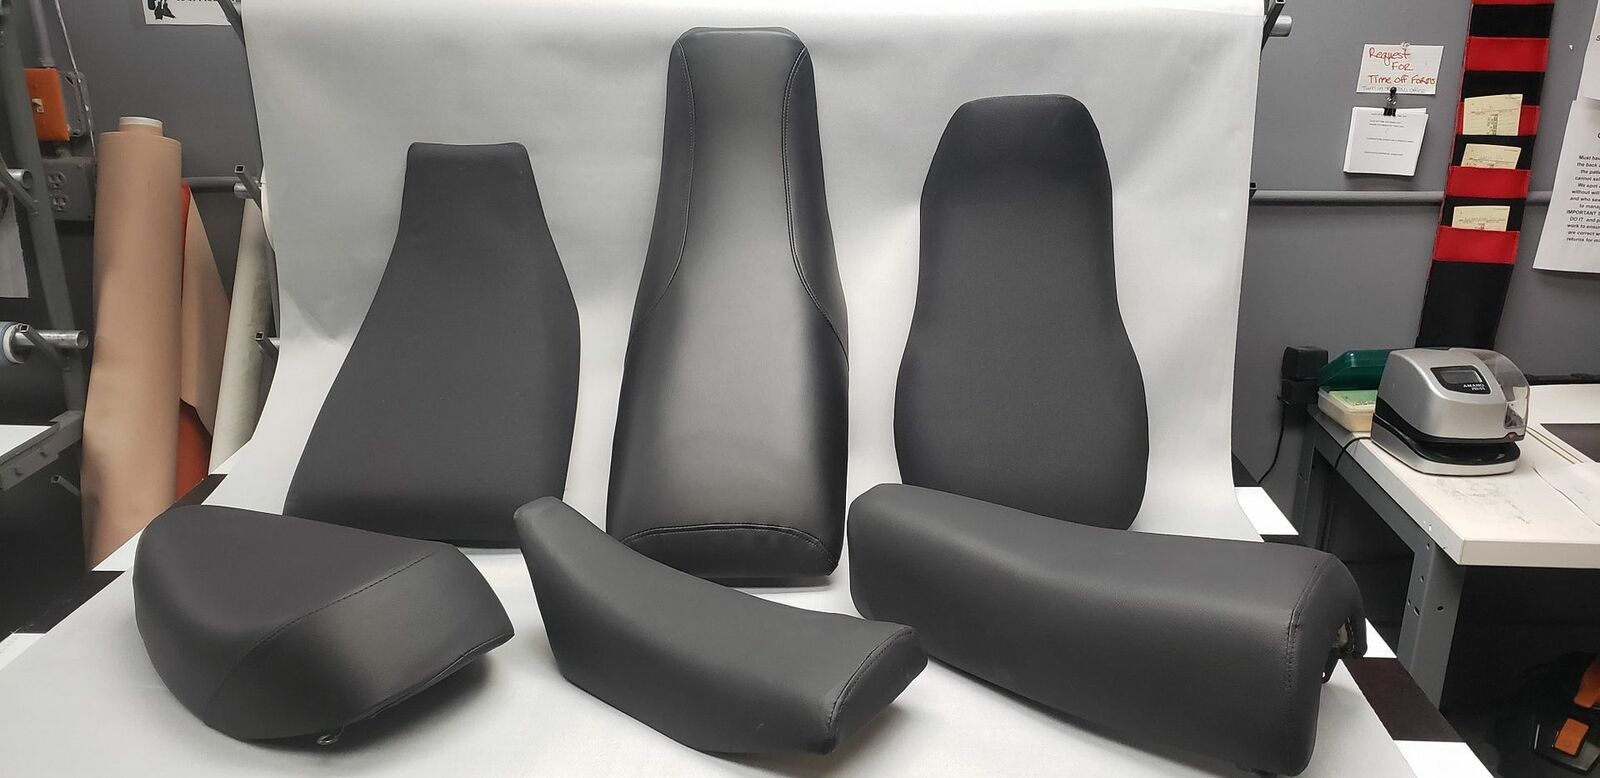 Honda TRX 200 4 TRAC Seat Cover For 1990 To 1991 Models Black Color Seat Cover - $32.90